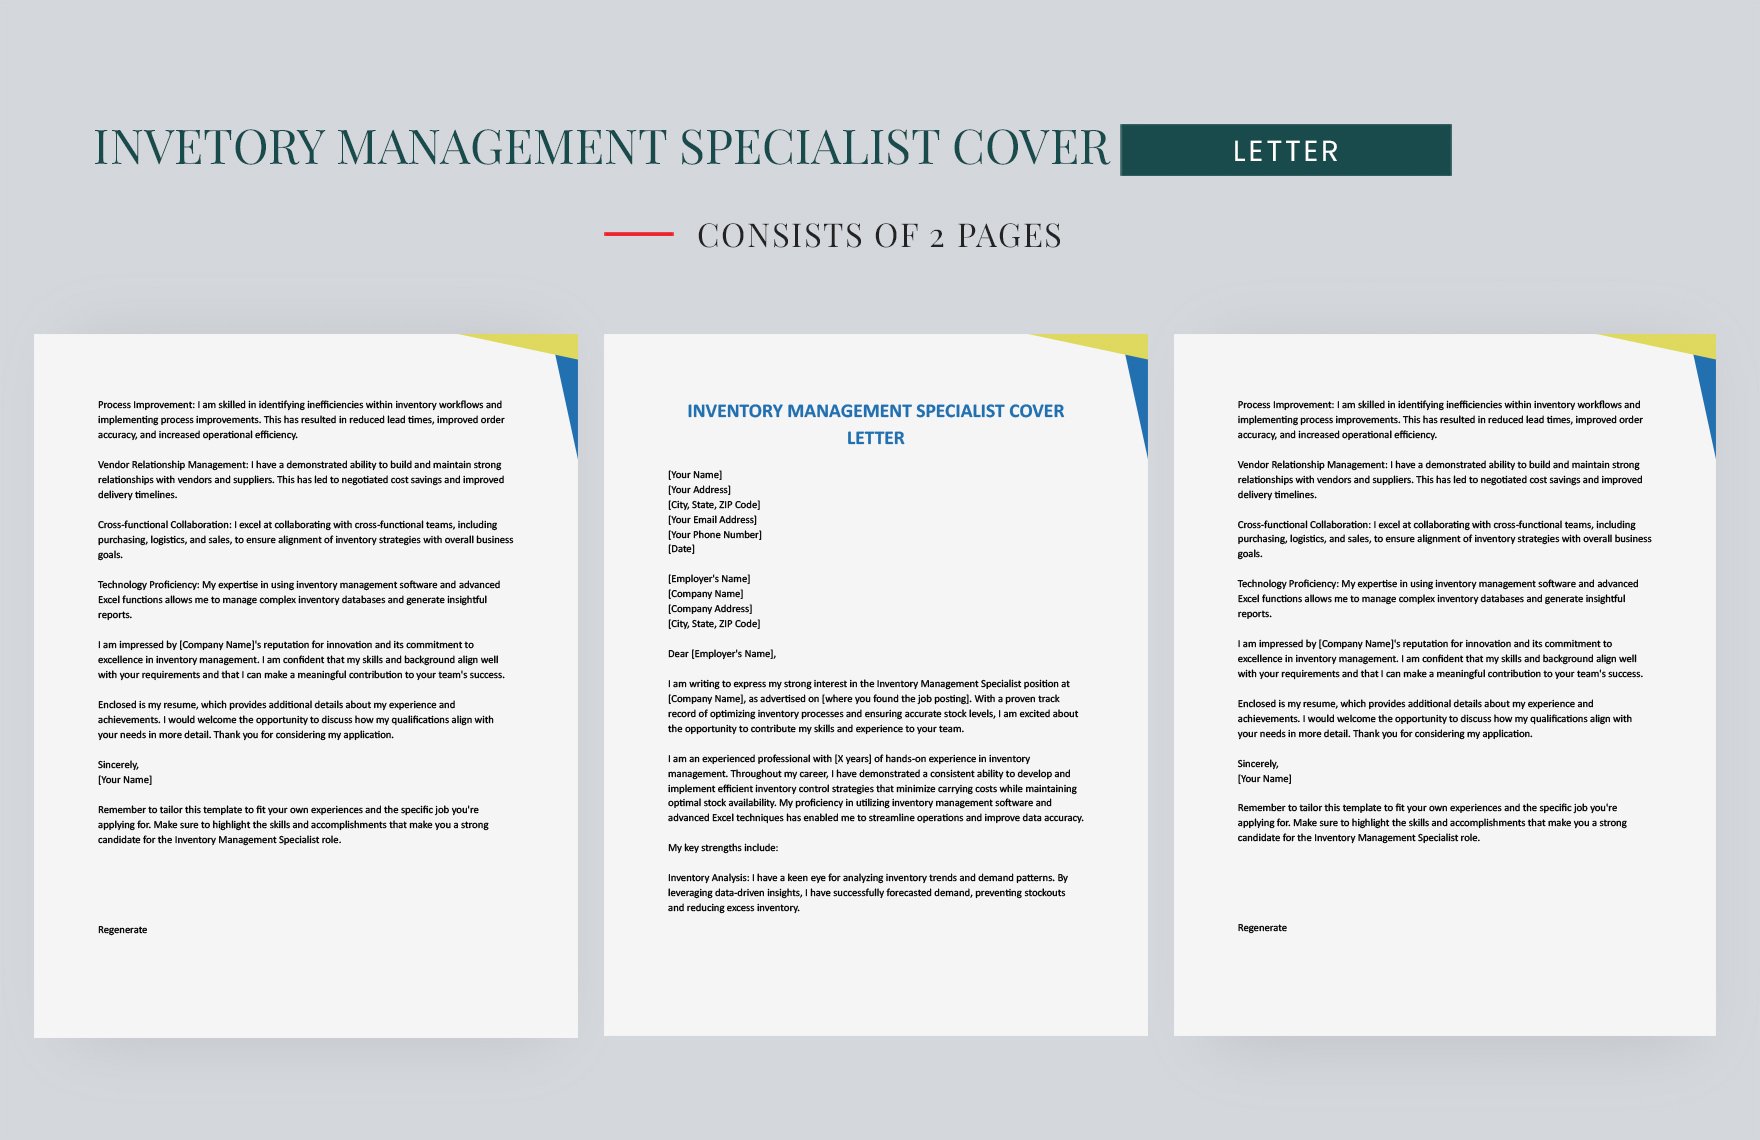 Inventory Management Specialist Cover Letter in Word, Google Docs